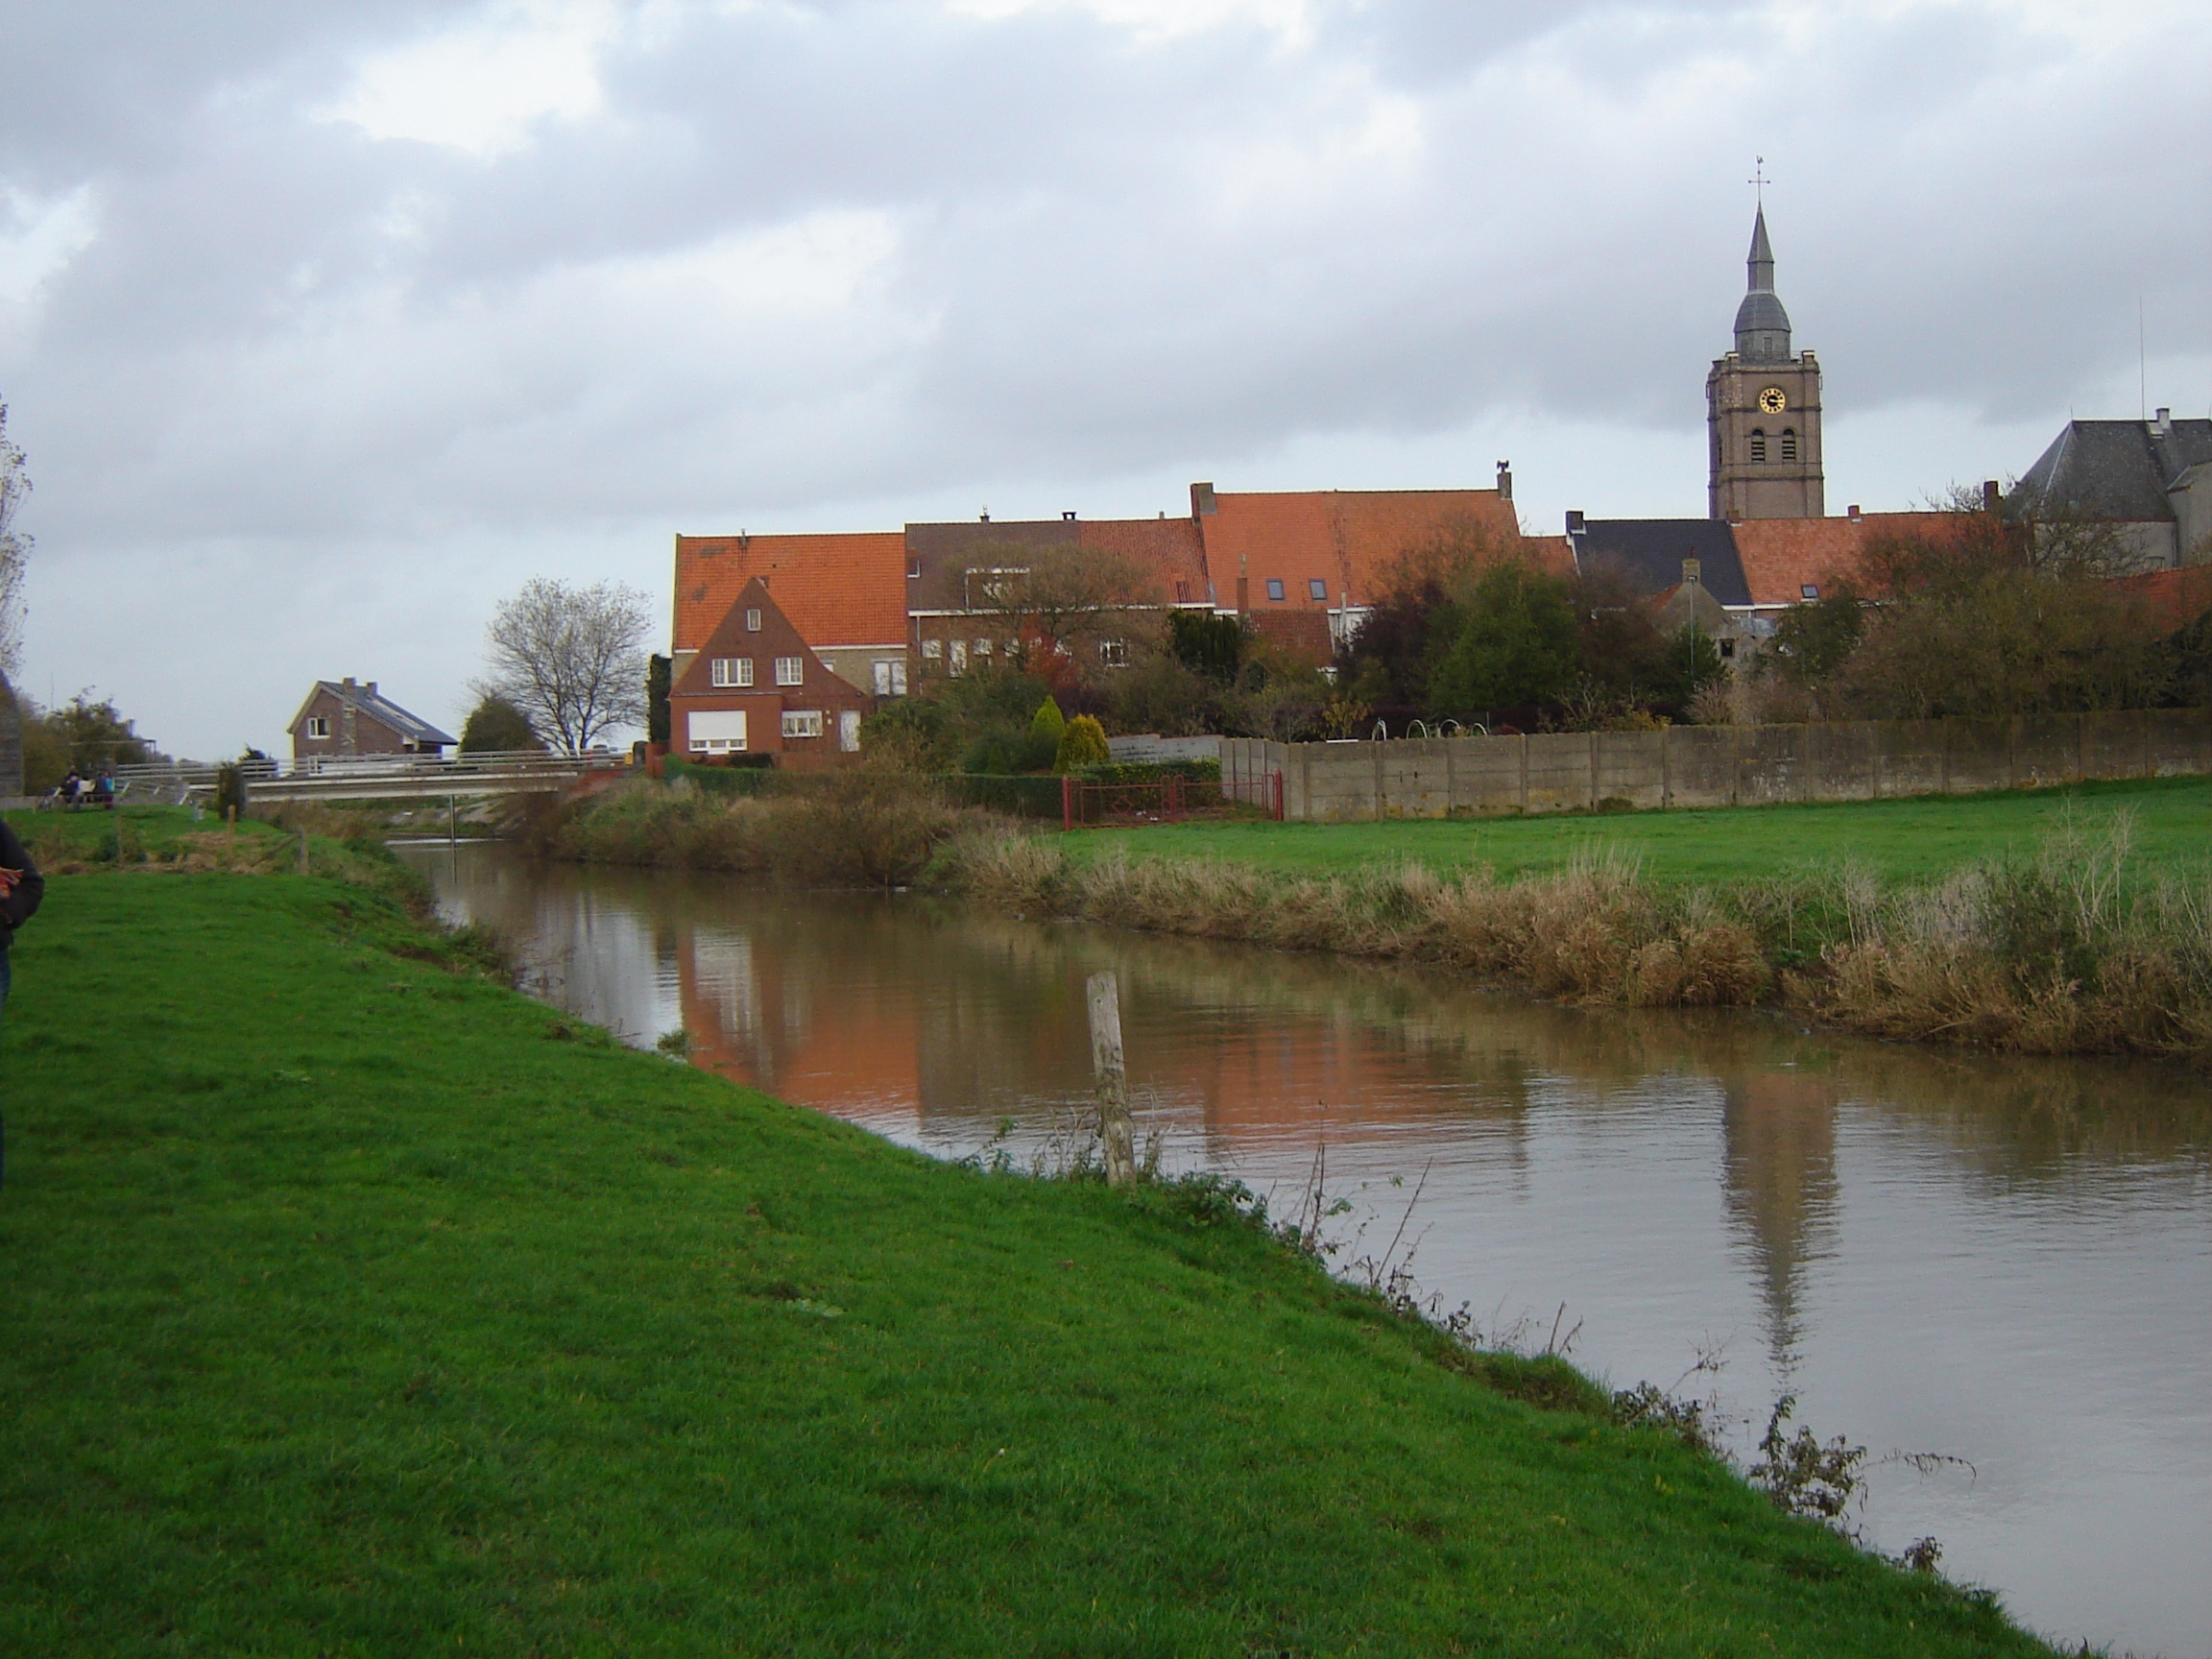 The Yser a river and major historical site in Belgium Les Canalous